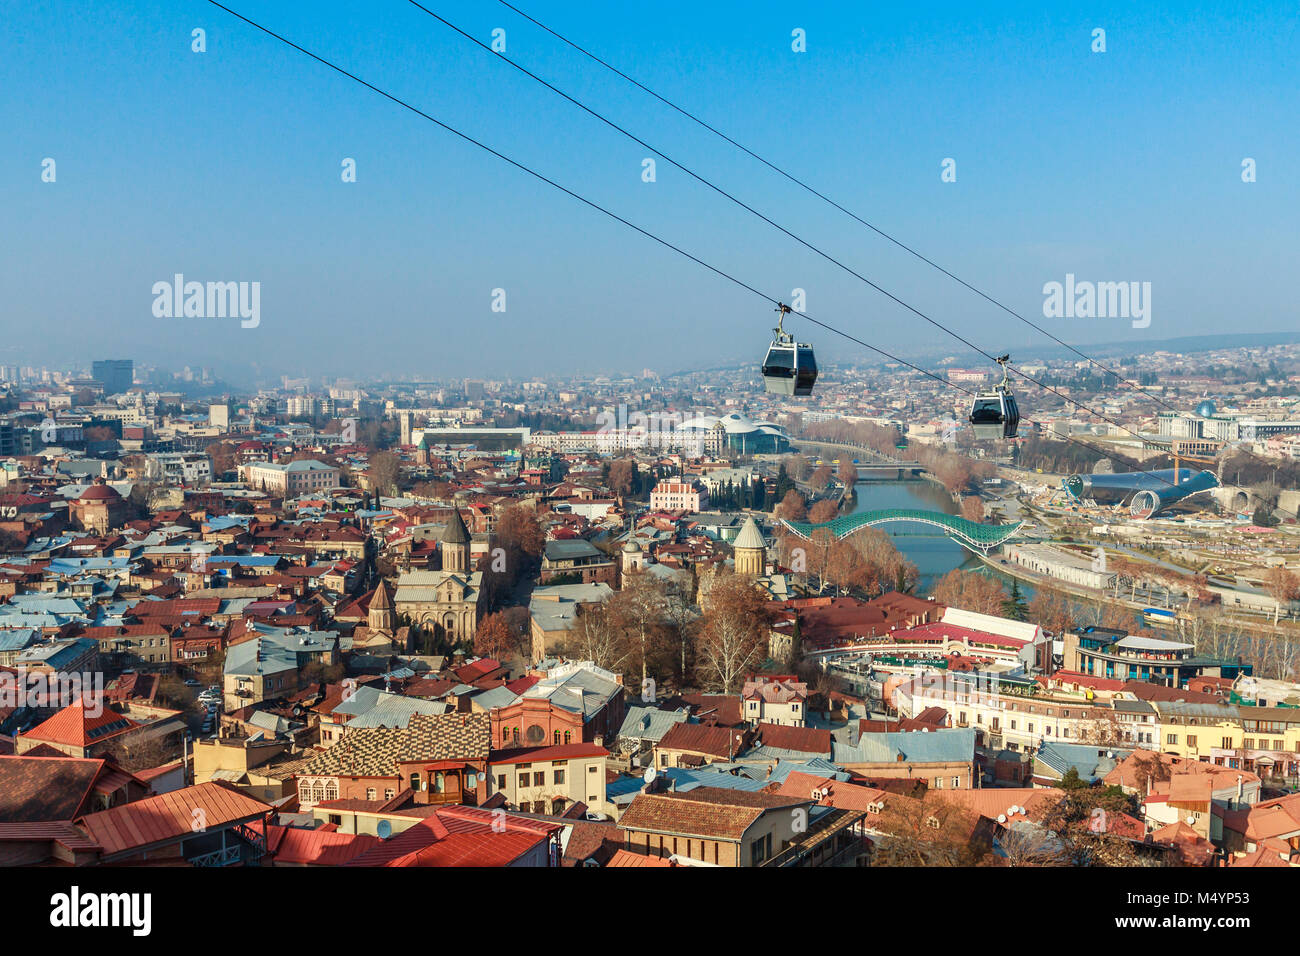 Tbilisi old city streets, Kura river, Holy Trinity church and cable car in the foreground, Georgia Stock Photo